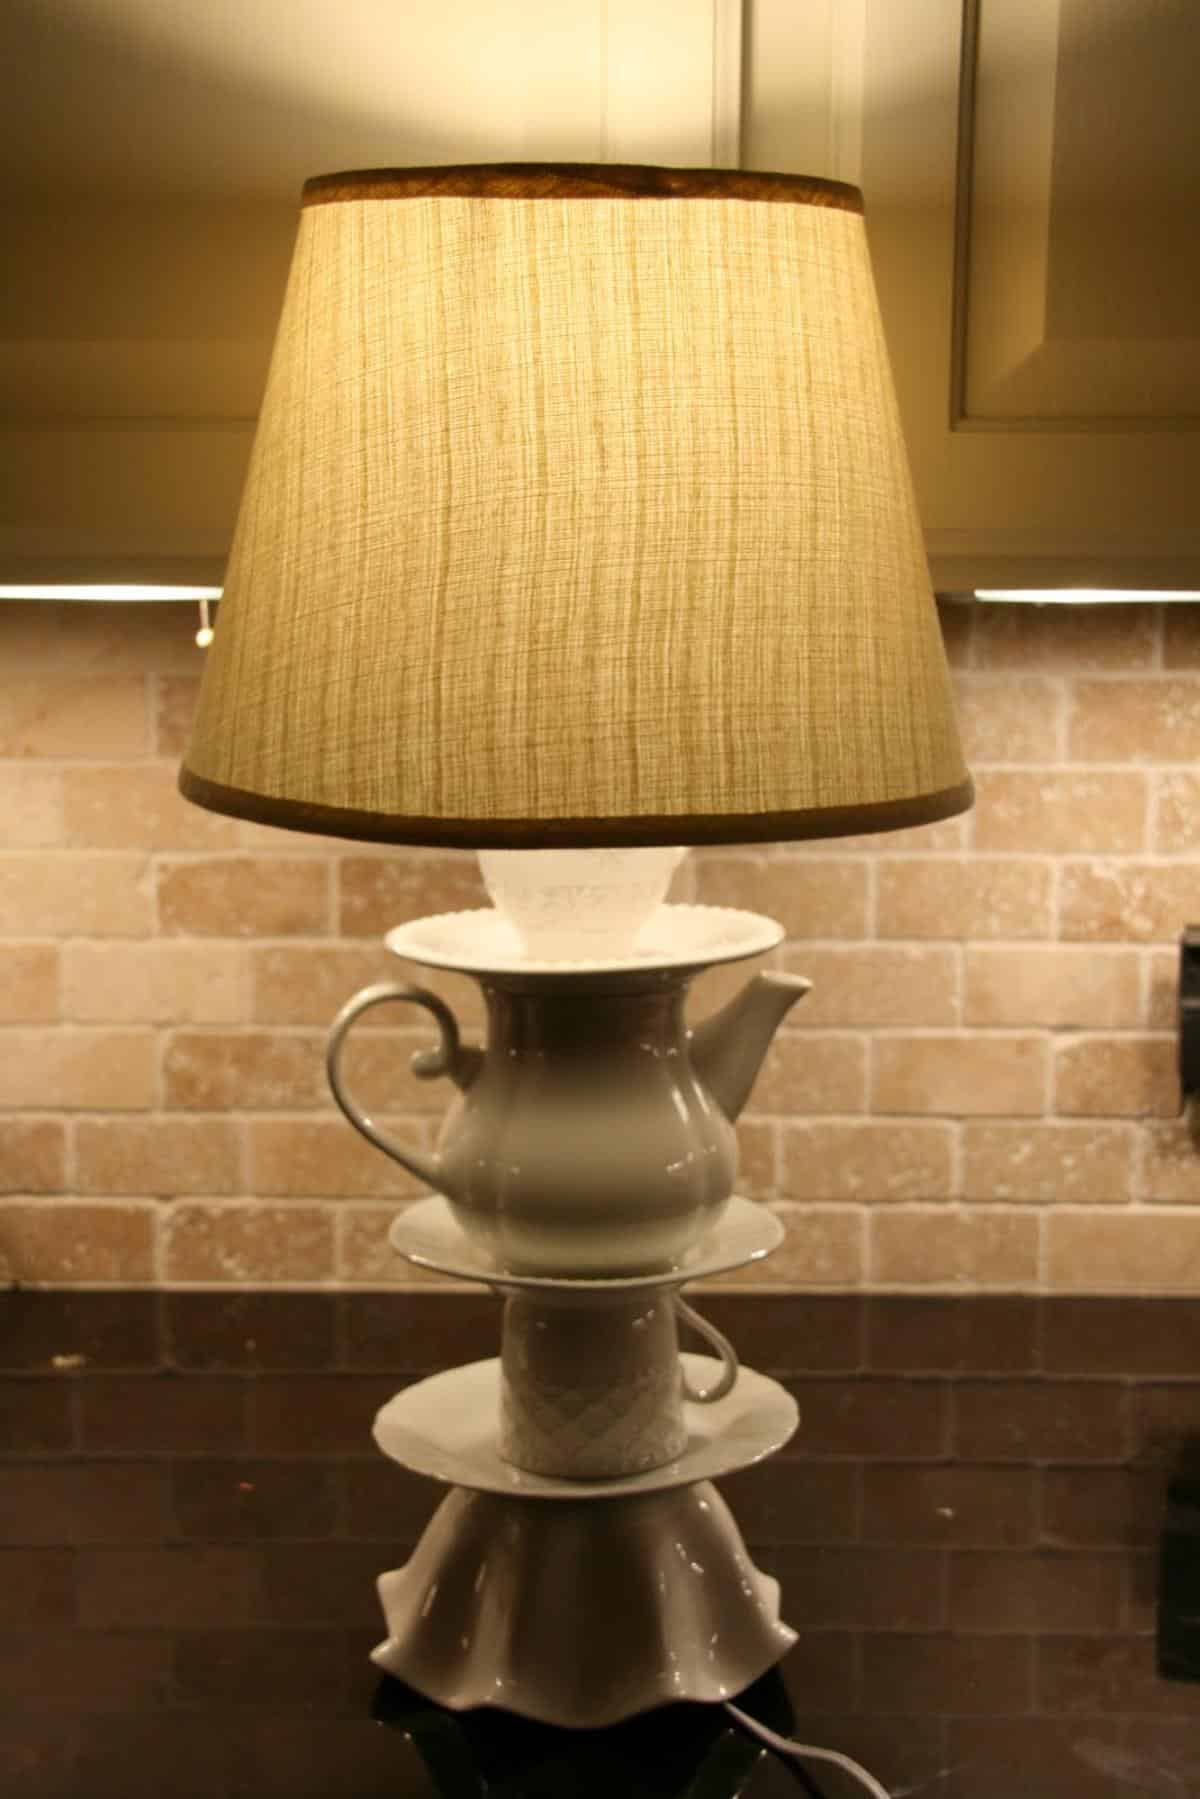 Better Late Than Never....Anthro Knock Off Lamp